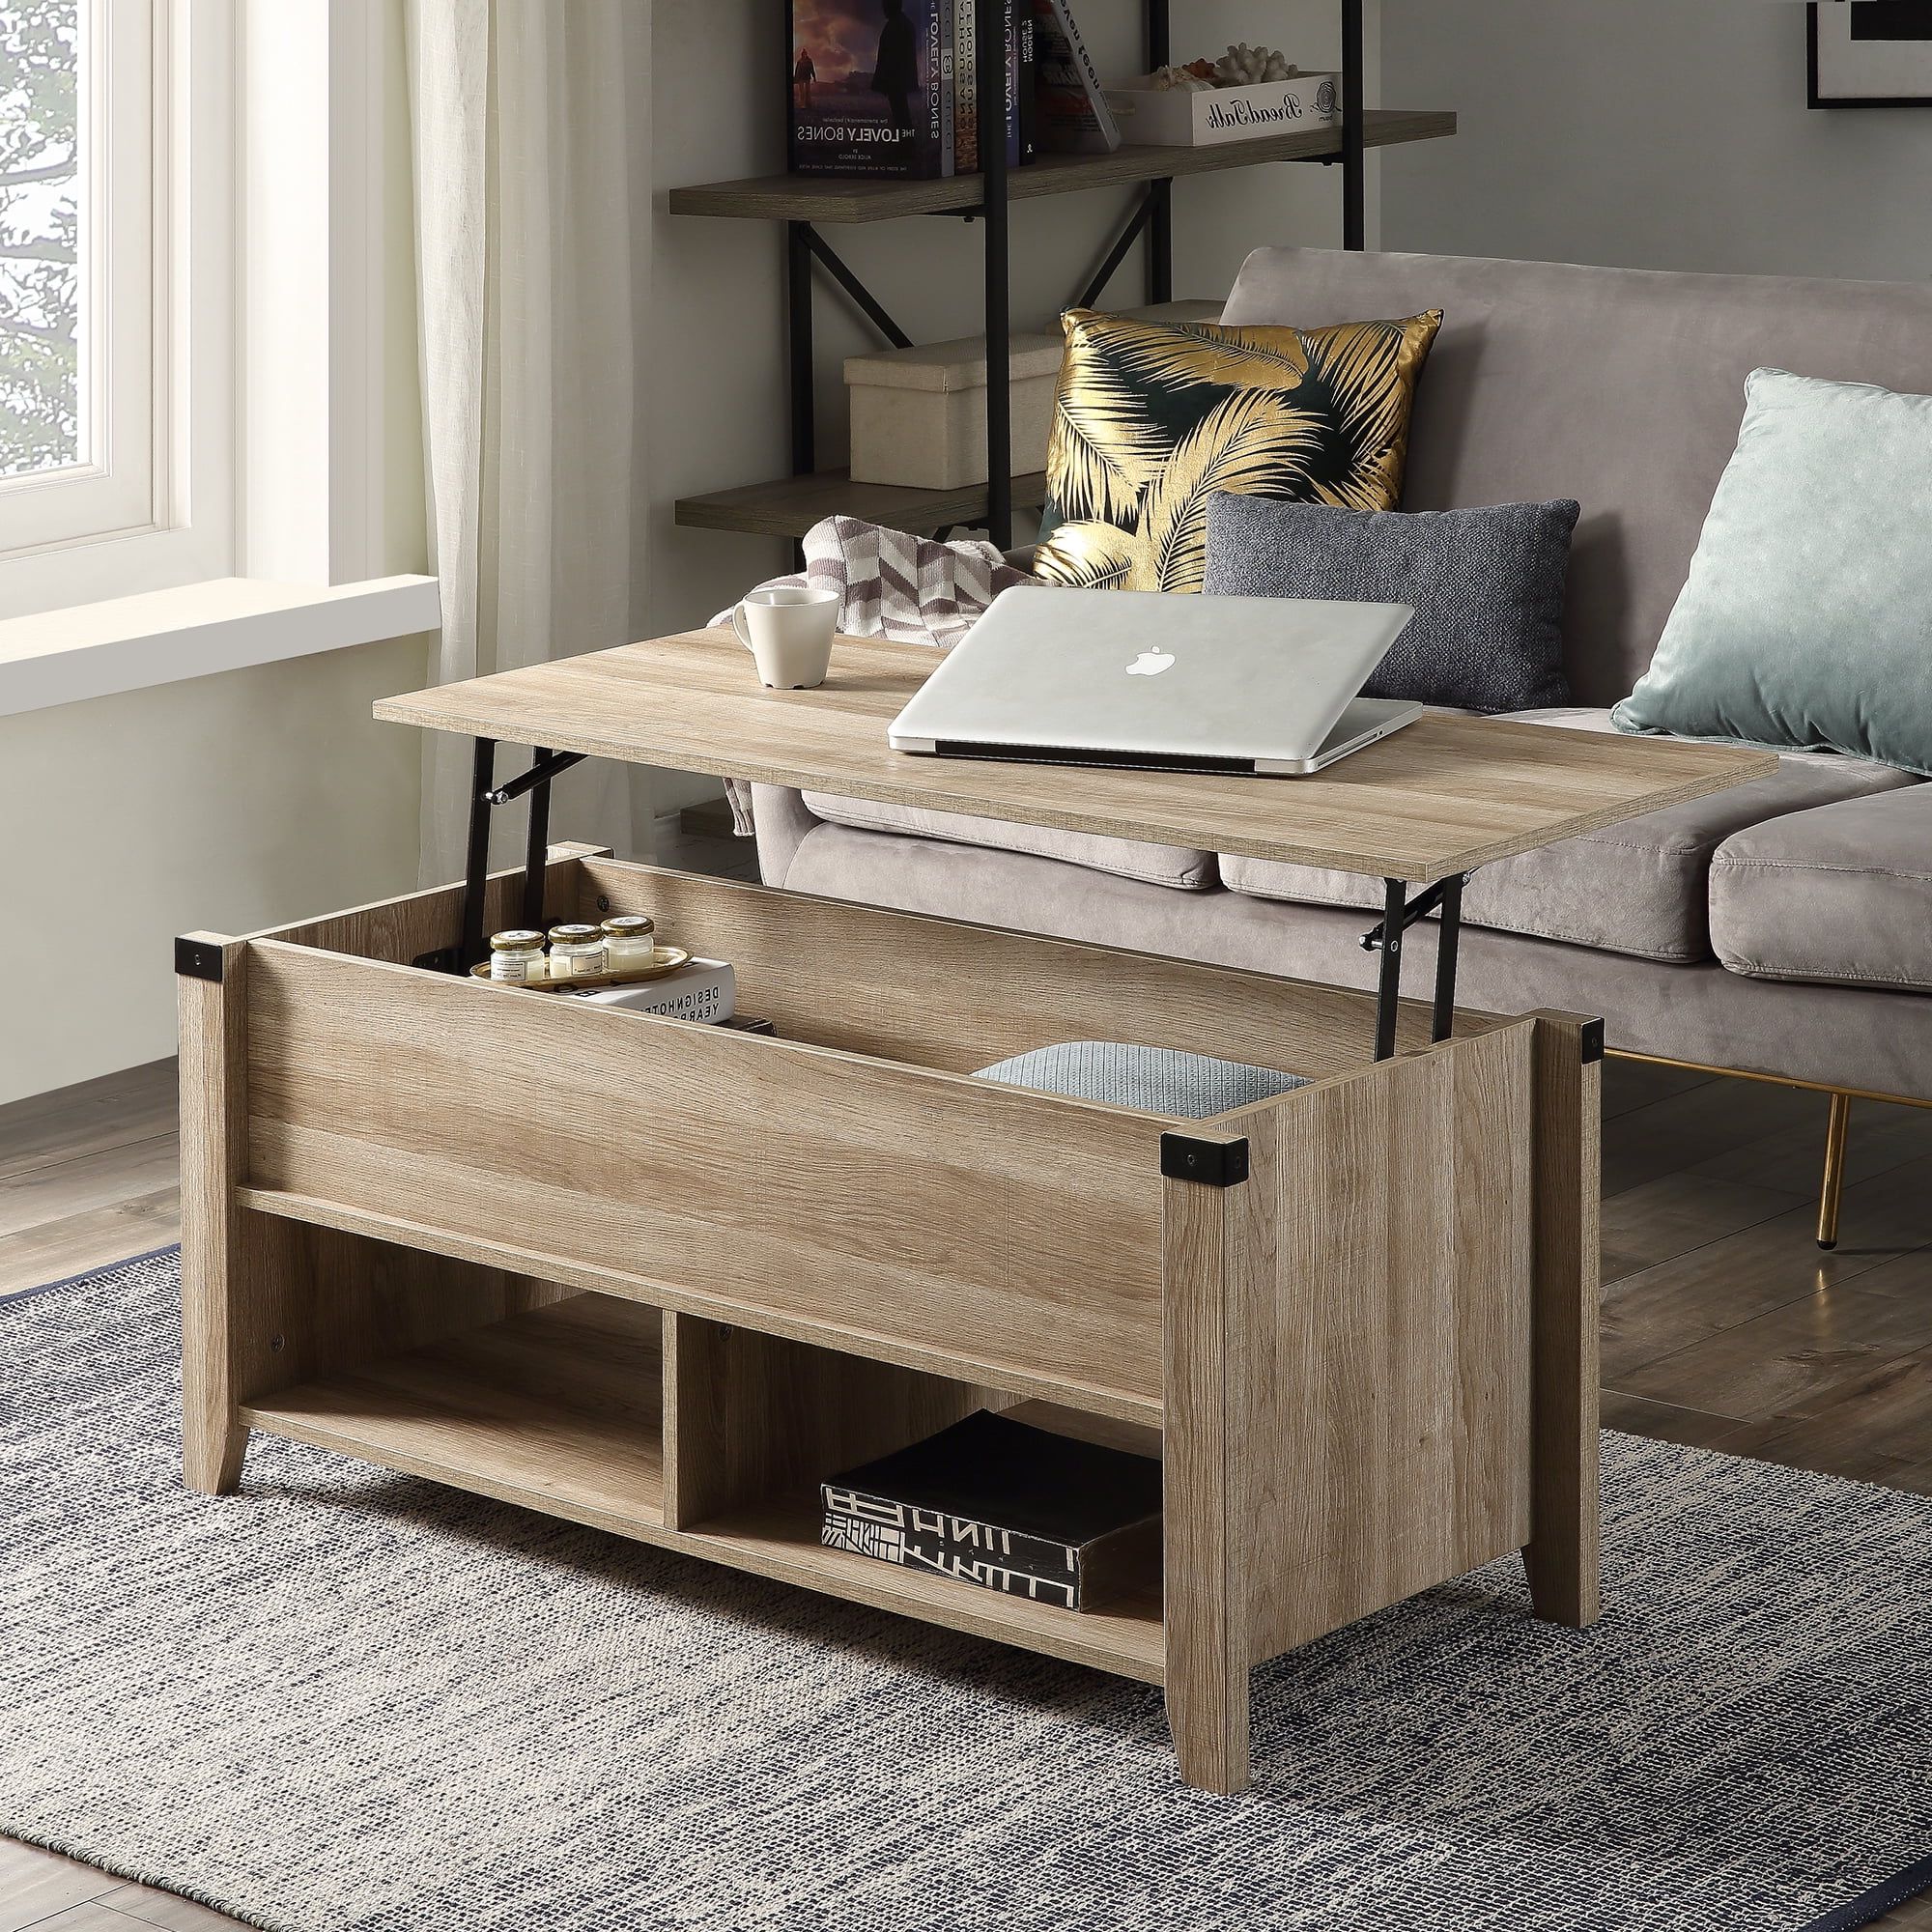 Preferred Freestanding Tables With Drawers Within Multipurpose Coffee Table With Drawers ,open Shelf And Storage, Lifting (View 5 of 15)